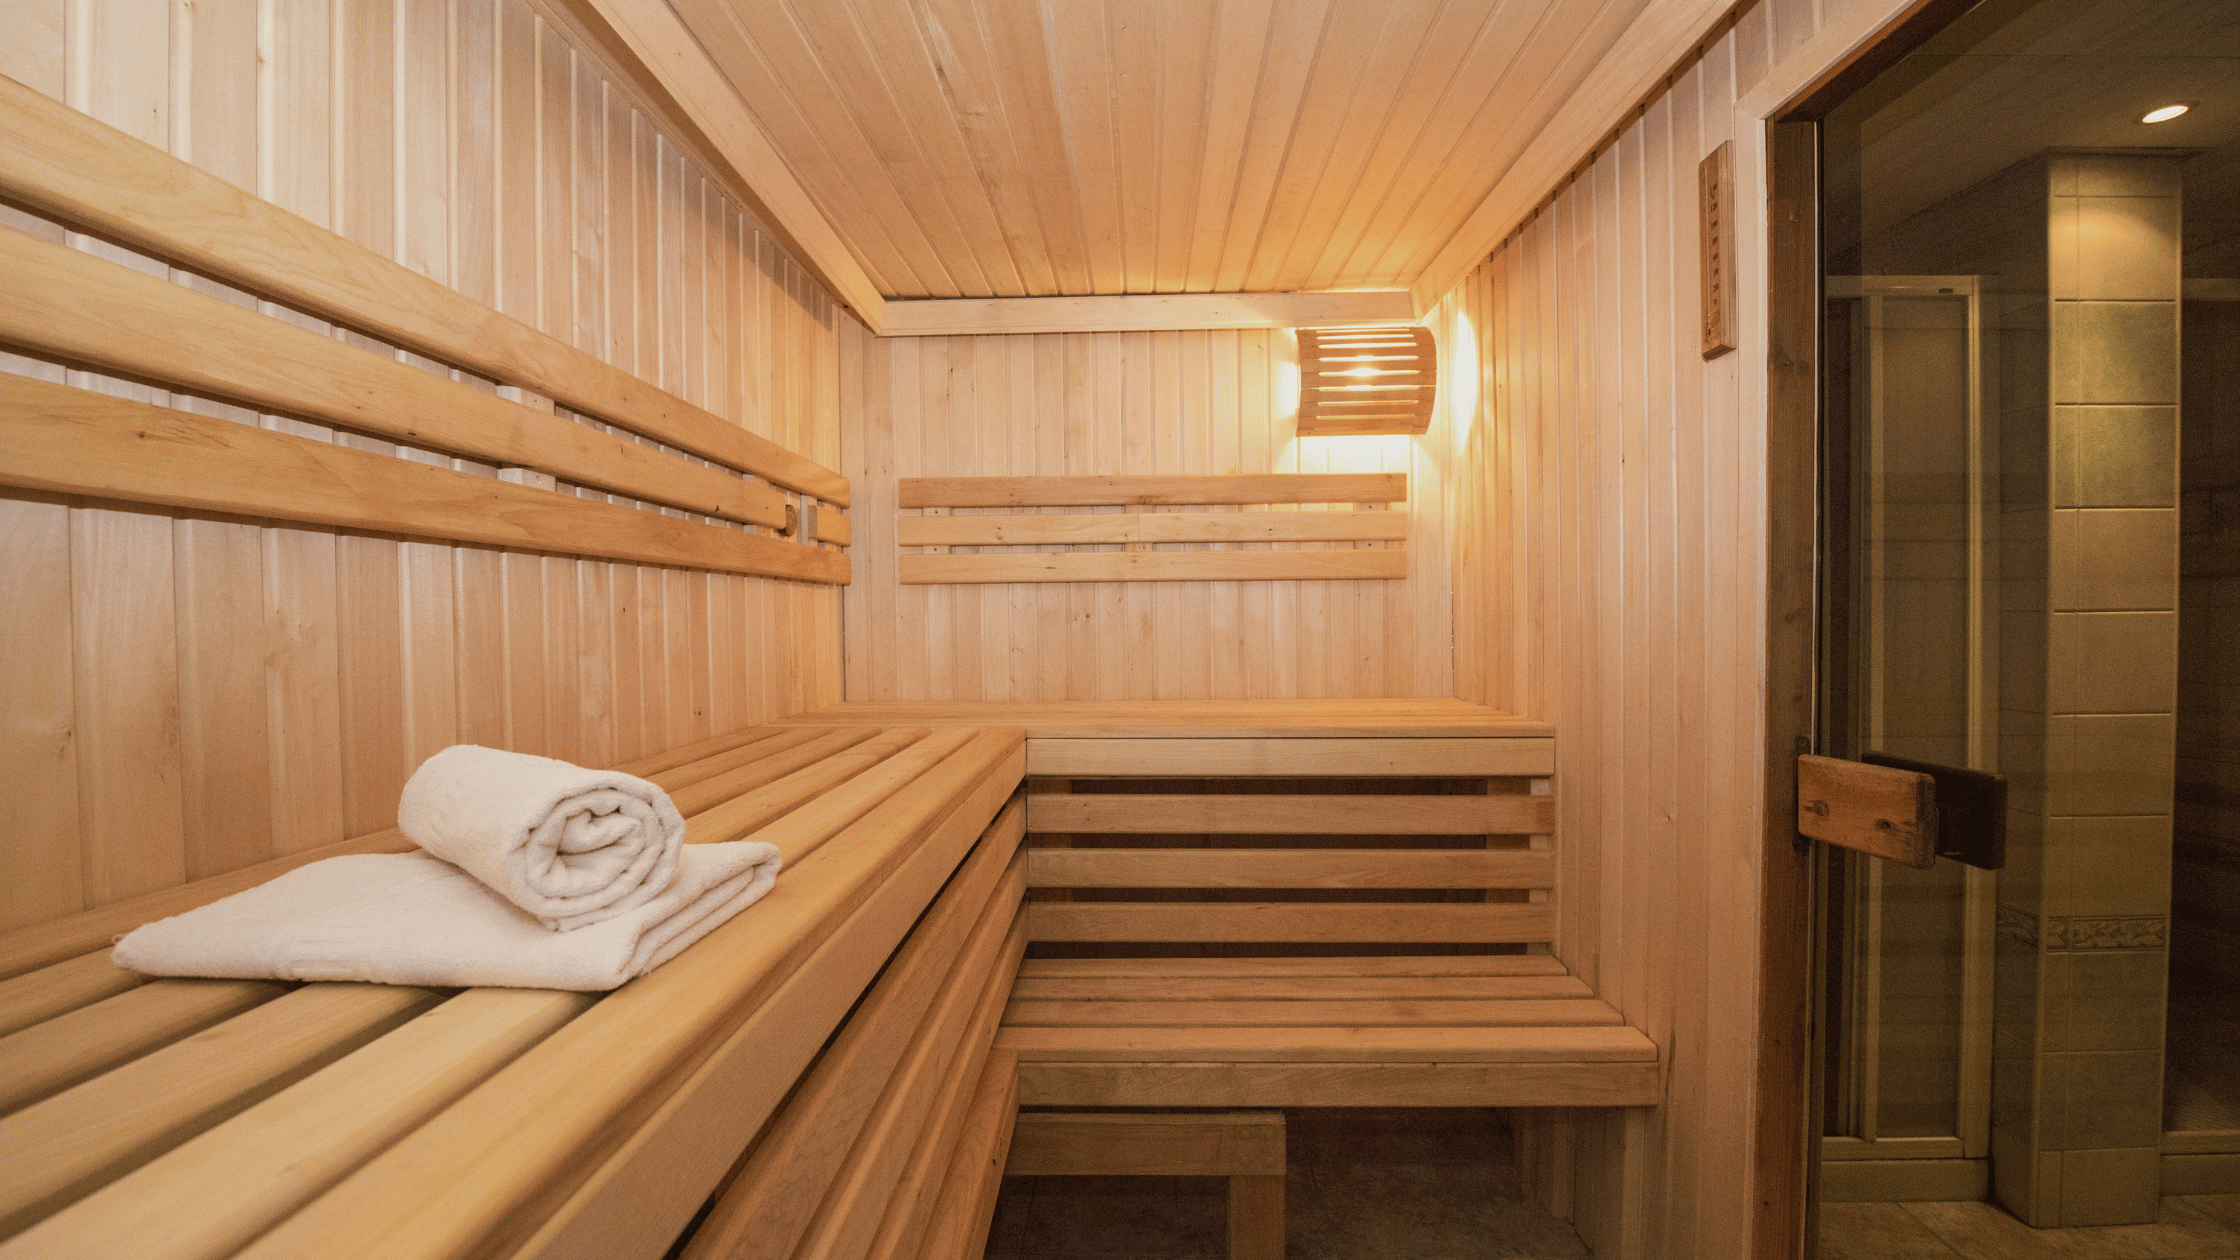 The Health Benefits of Sauna Sessions: How Regular Use Can Improve Your Wellbeing